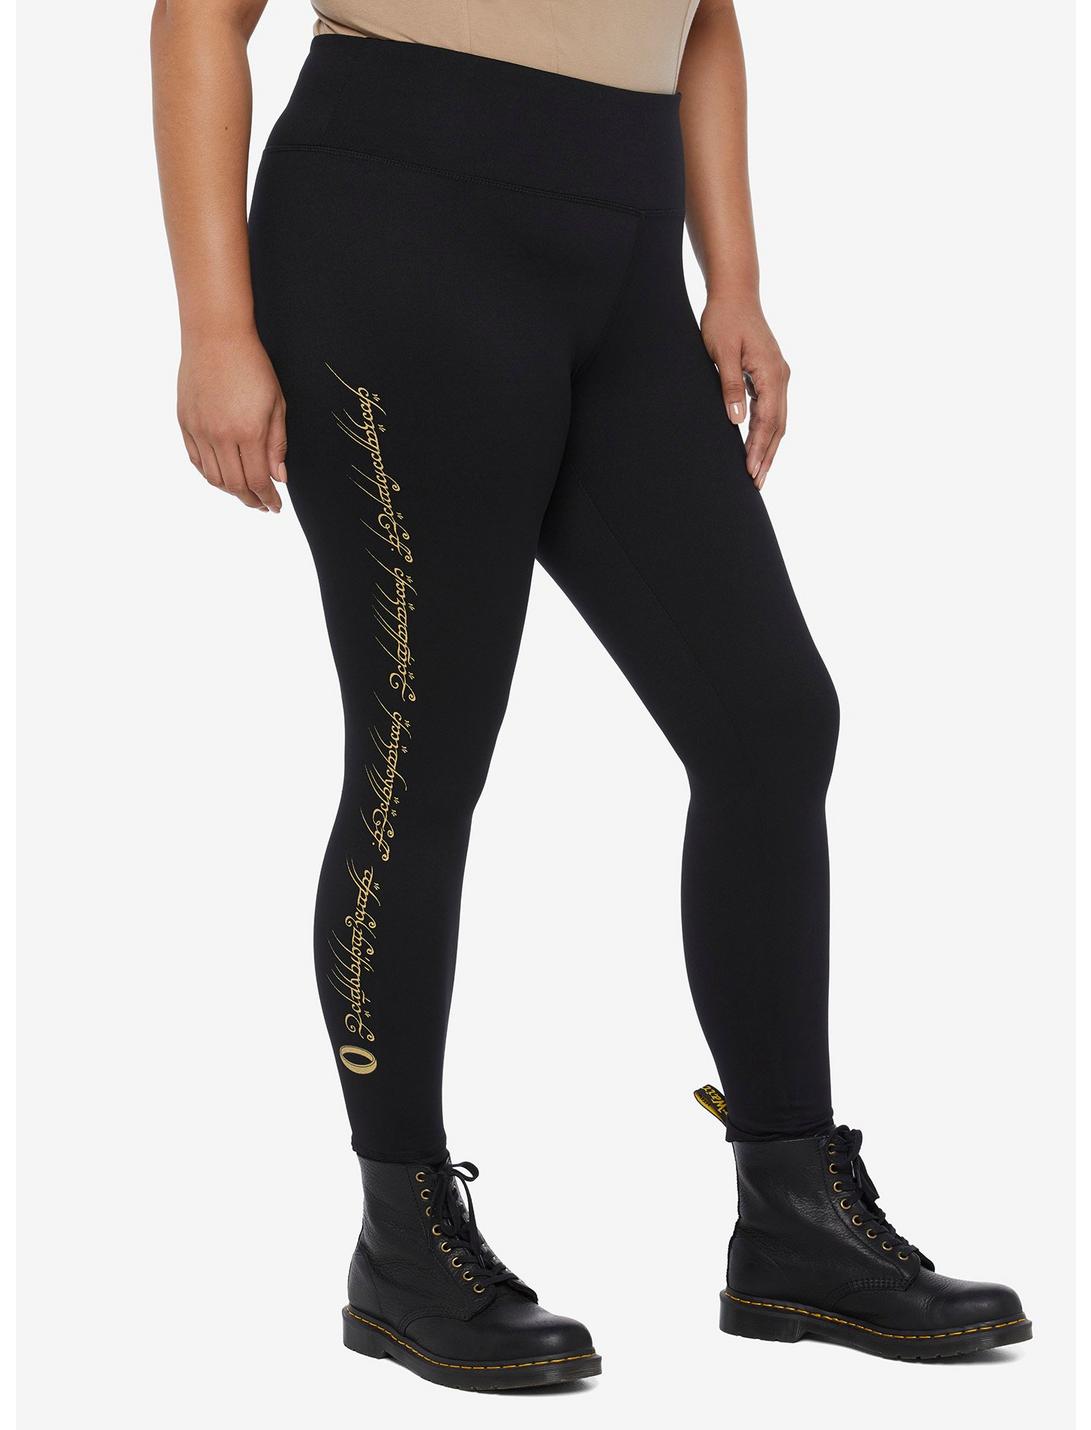 The Lord Of The Rings The One Ring Leggings Plus Size, MULTI, hi-res